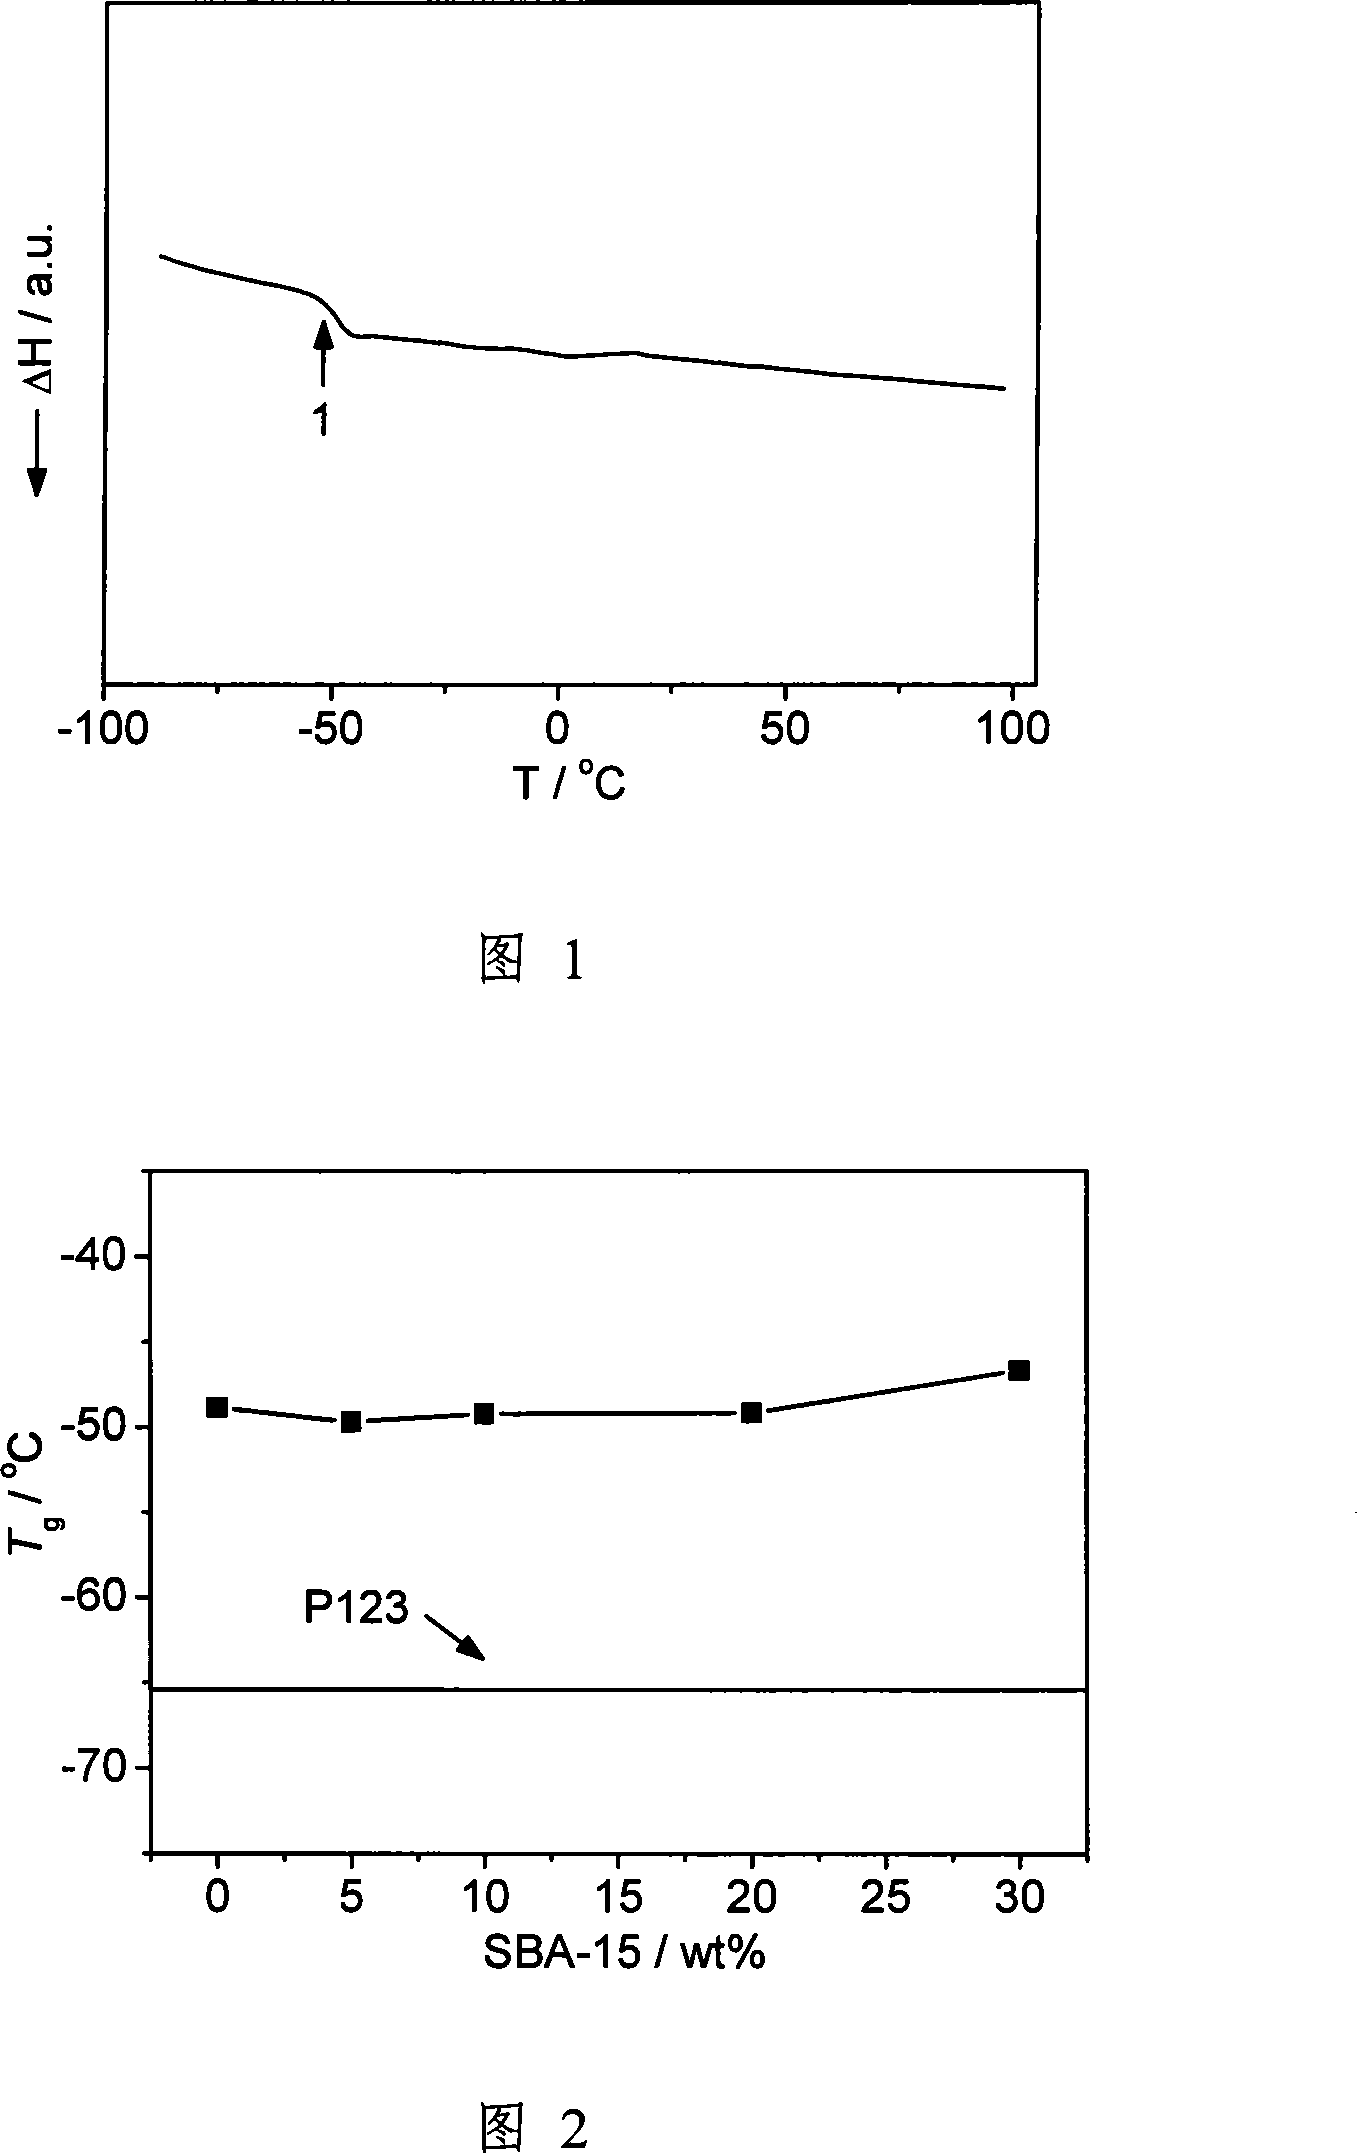 Co-polymer based polymer electrolyte material for lithium battery, compound electrolyte film and its preparation method